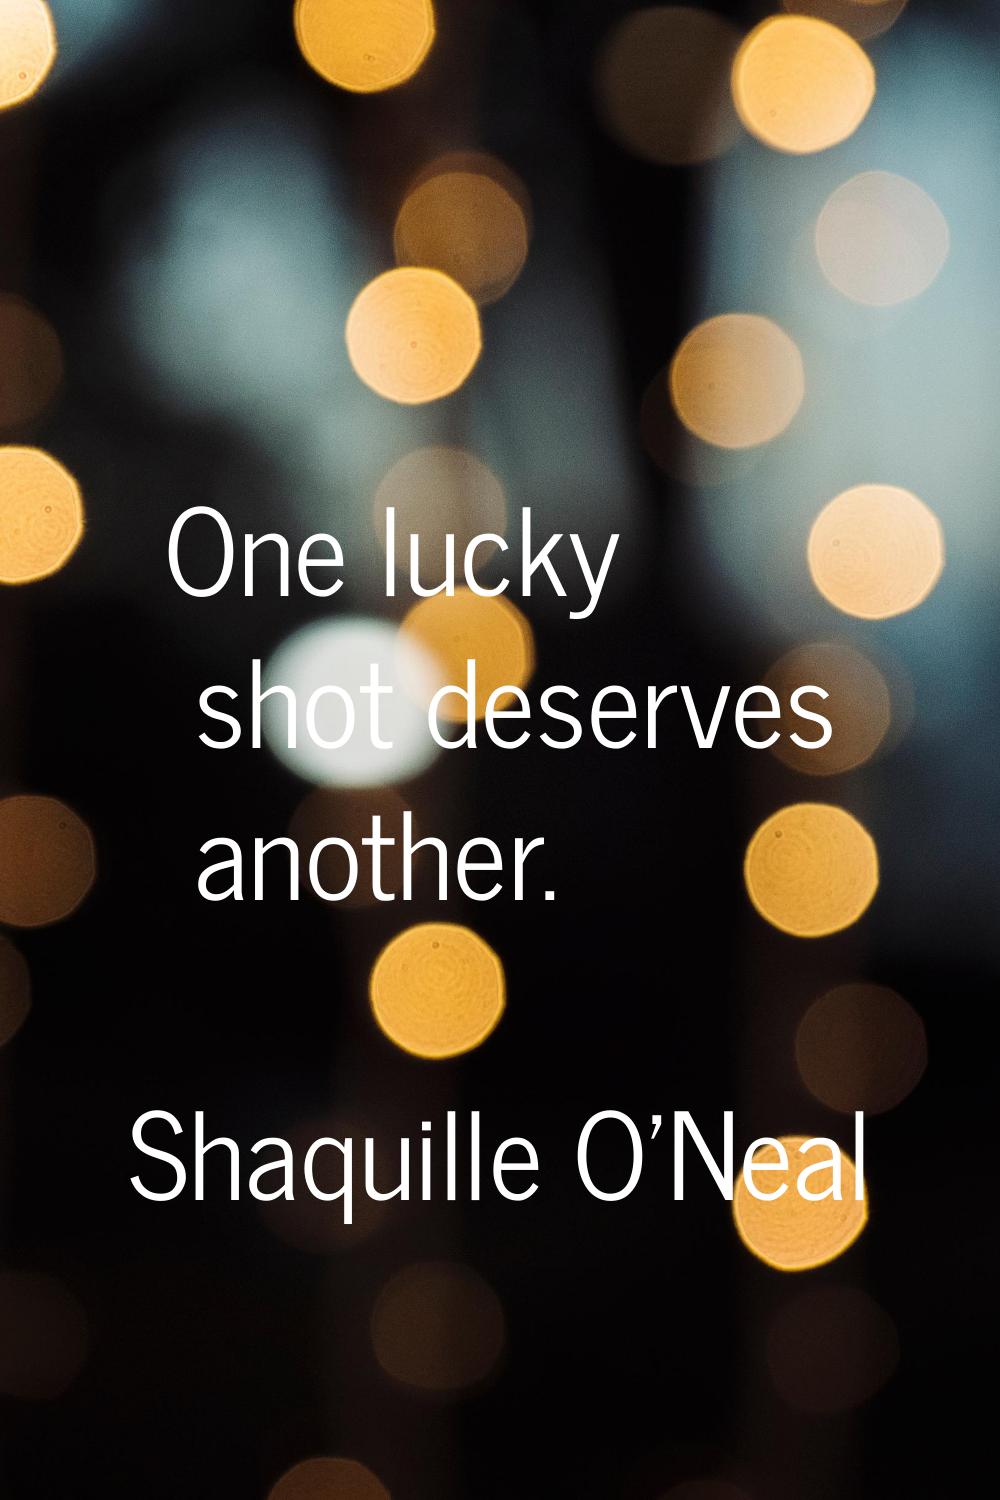 One lucky shot deserves another.